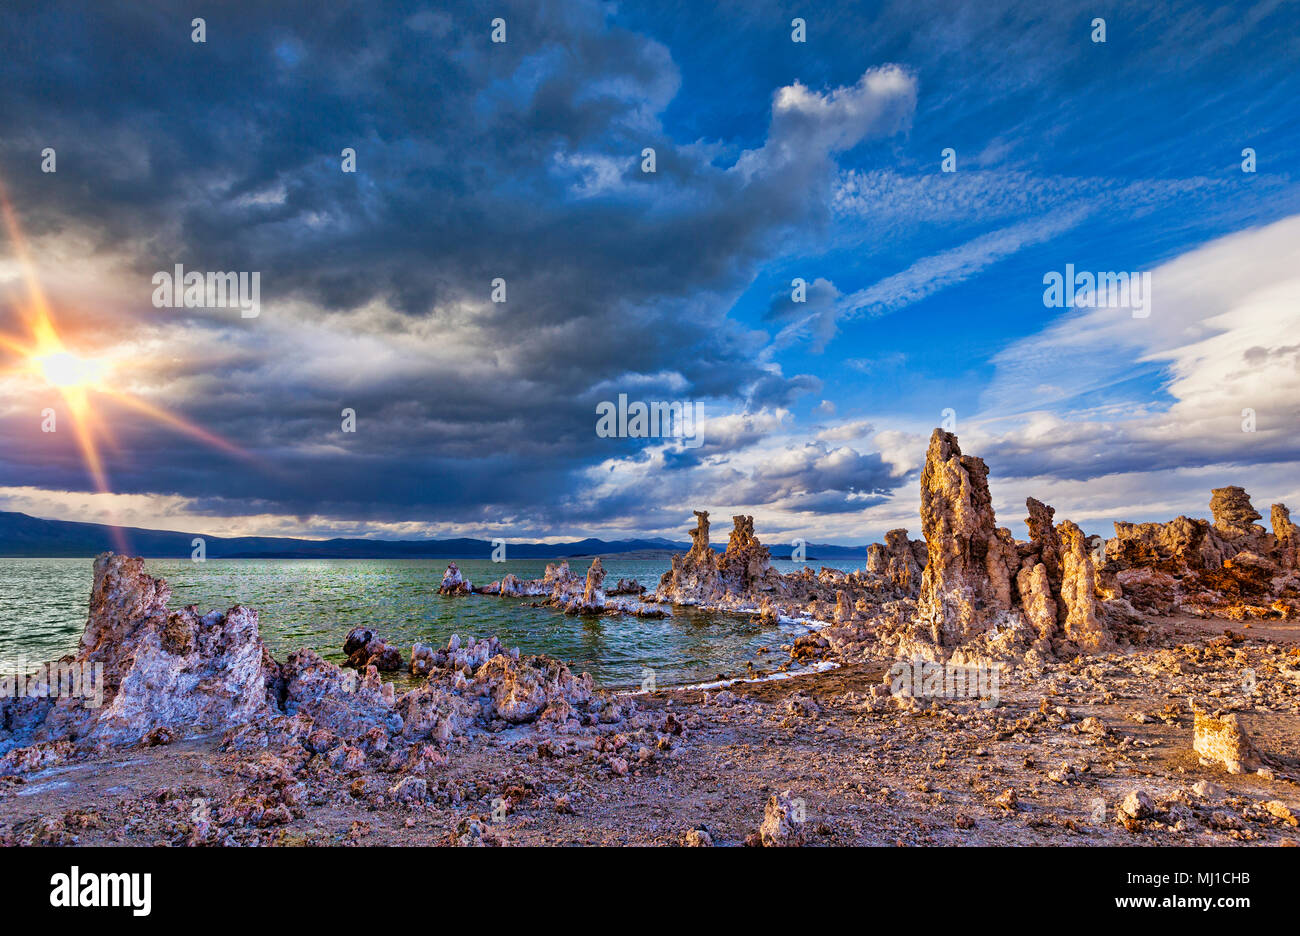 Tufa towers, which were formed under water, revealed on the shore of Mono Lake, California, at sunset, under a dramatic sky. Stock Photo